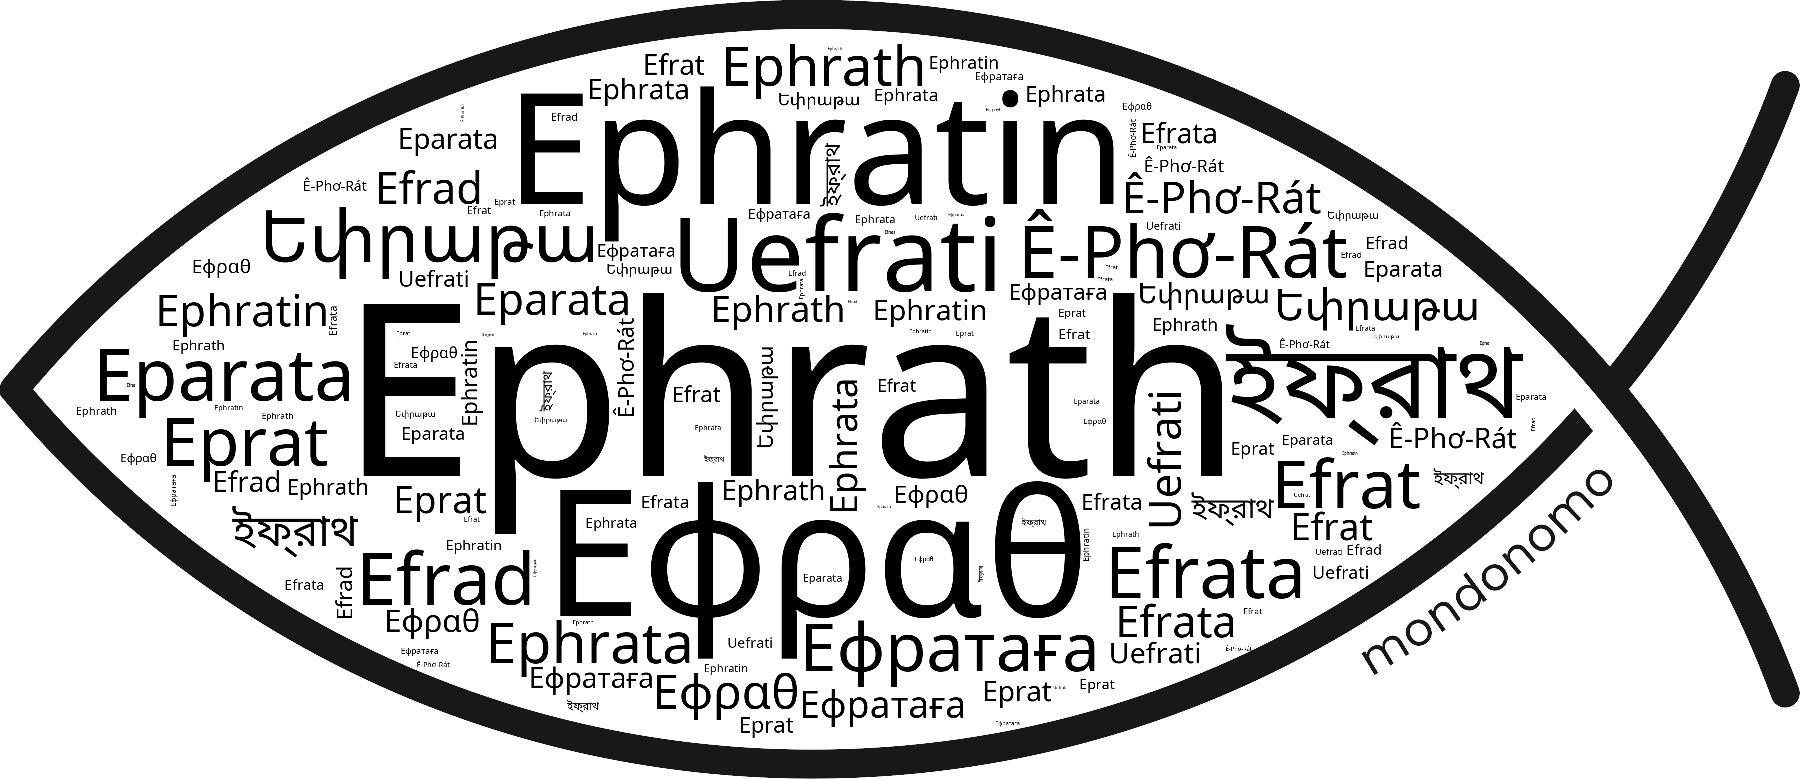 Name Ephrath in the world's Bibles